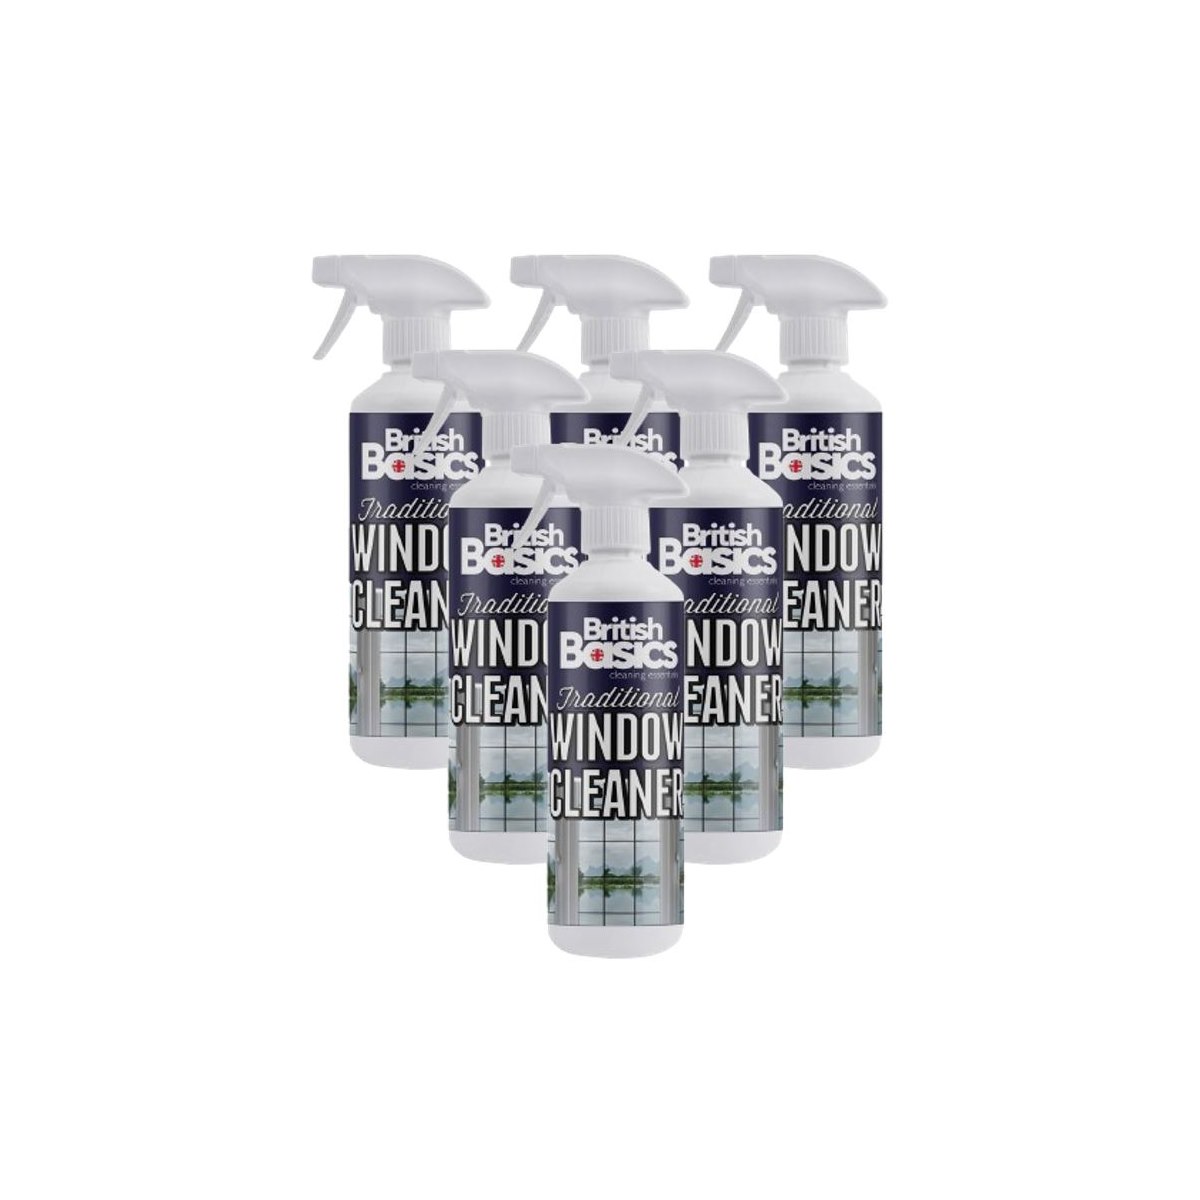 Case of 6 x British Basics Traditional Window Cleaner 500ml with FREE Lint Free Cloth